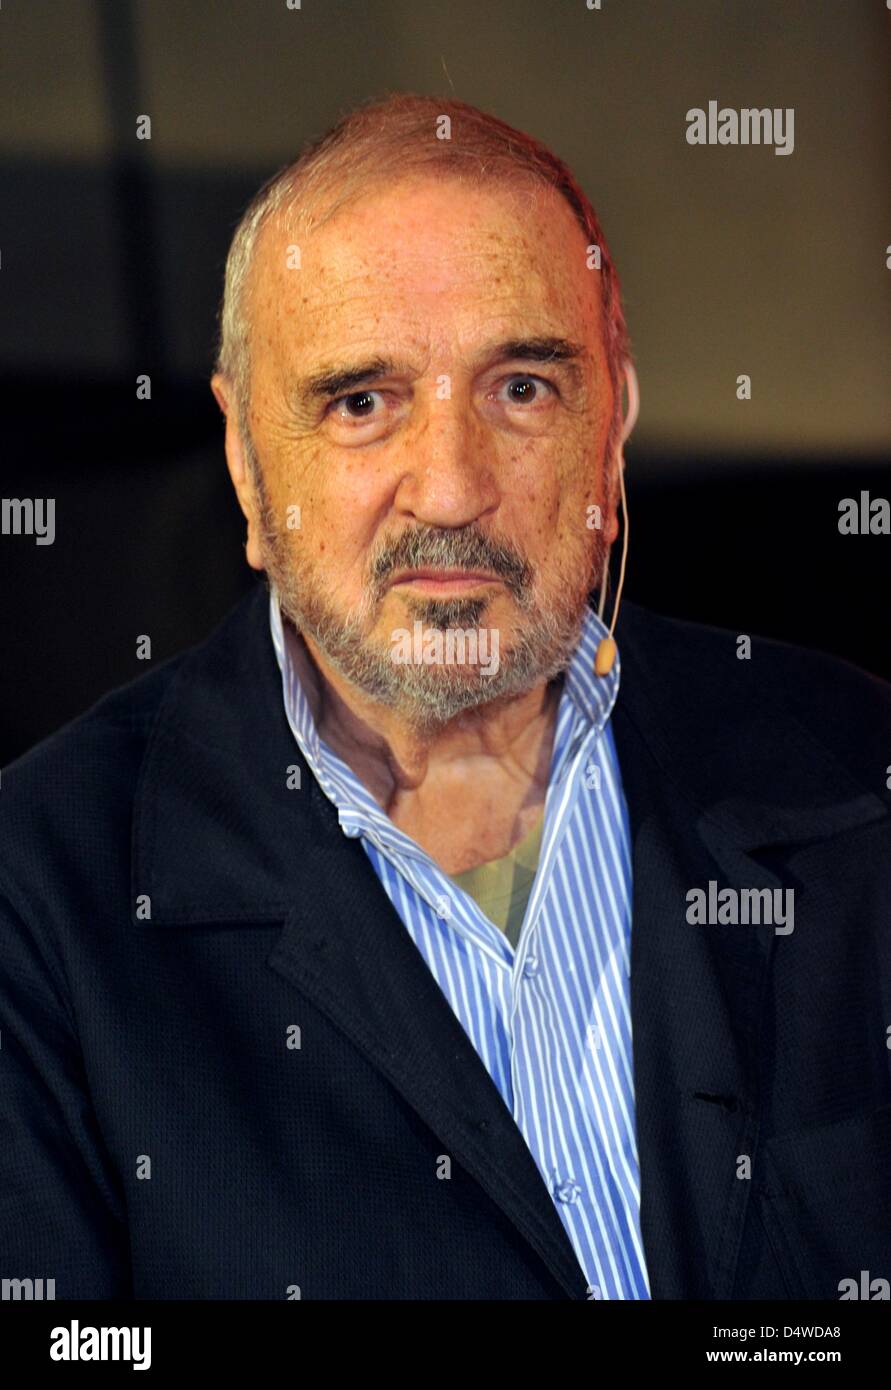 French author and screenplaywright Jean-Claude Carriere attends the Elephant round under the motto 'Double ground' in the course of Munich Literature Festival at Ludwig-Maximians University in Munich, Germany, 19 November 2010. Photo: Felix Hoerhager Stock Photo